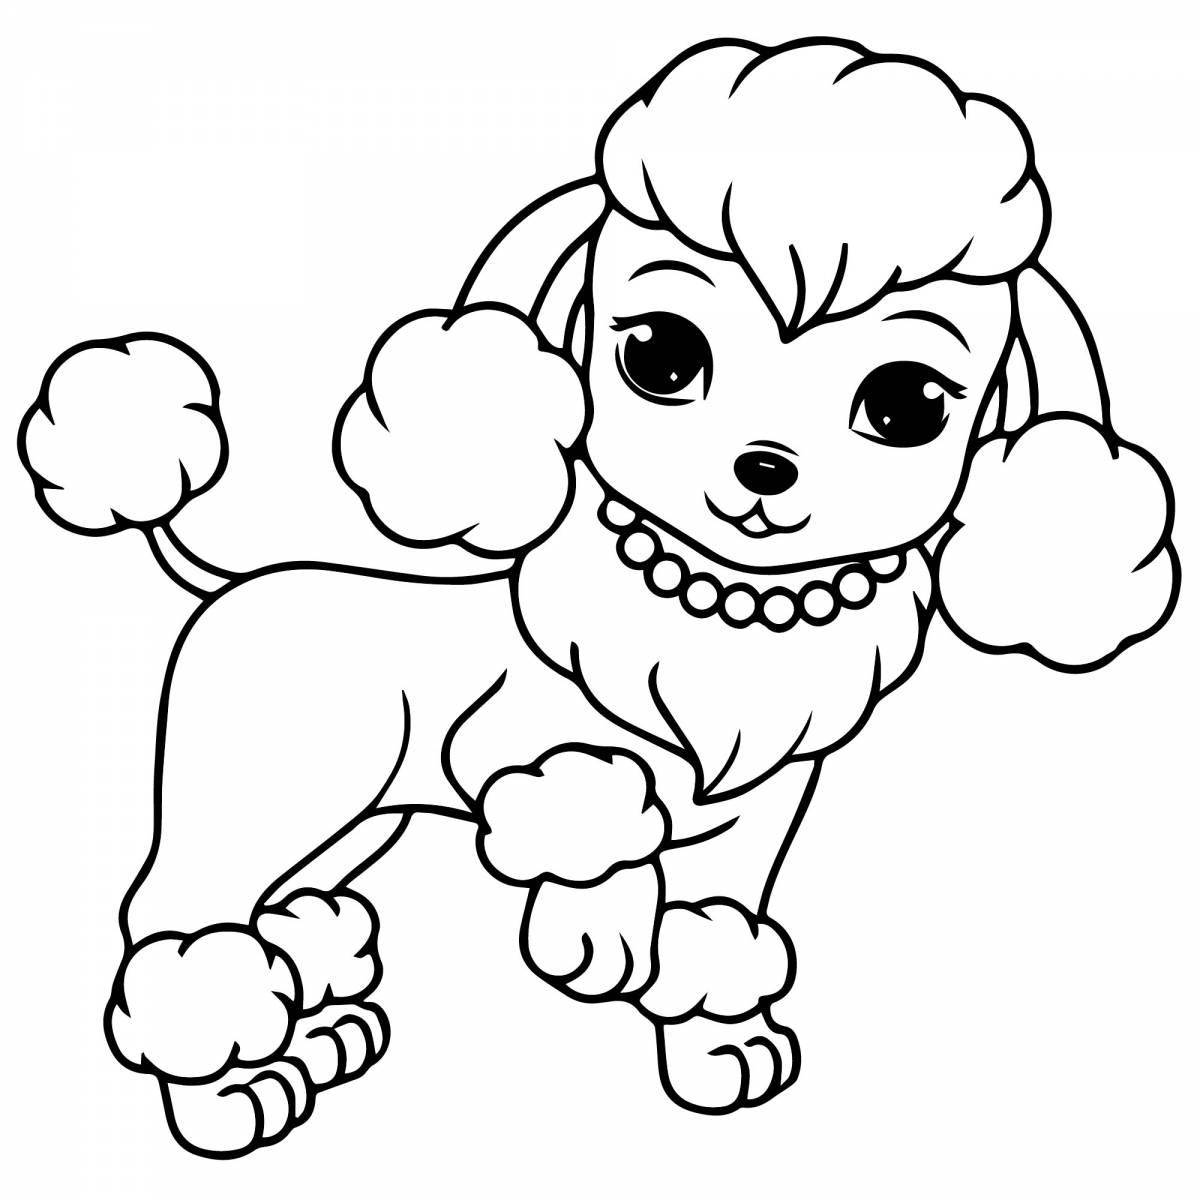 Funny poodle coloring book for kids